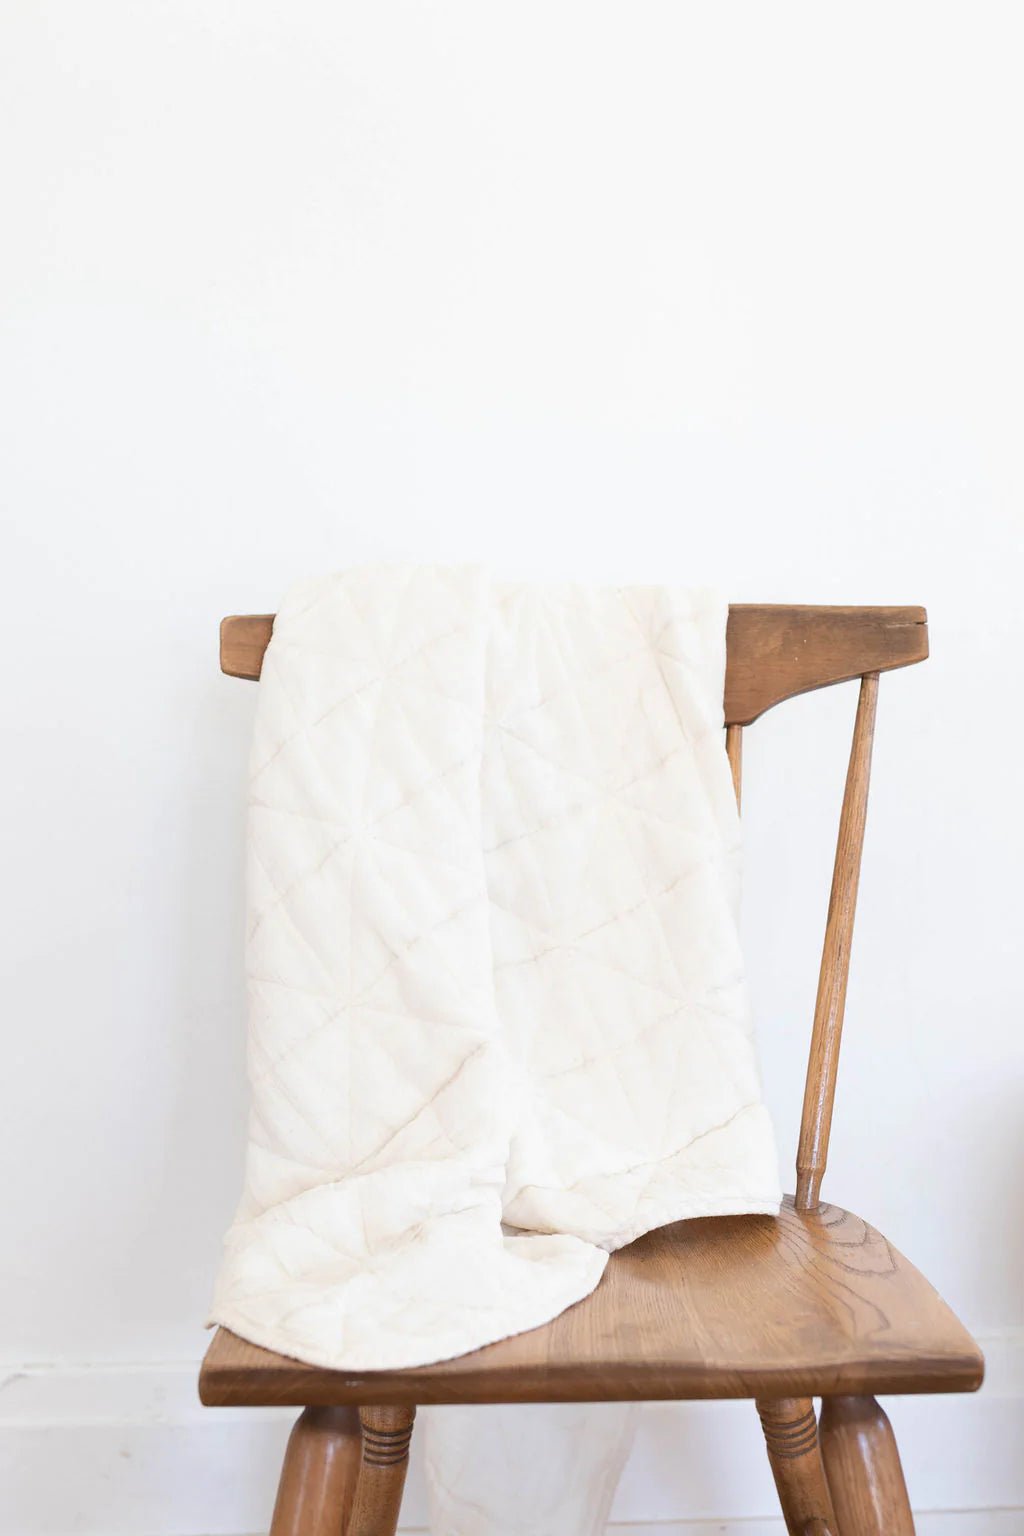 Quilted Blanket | Crib by New Grain - Maude Kids Decor